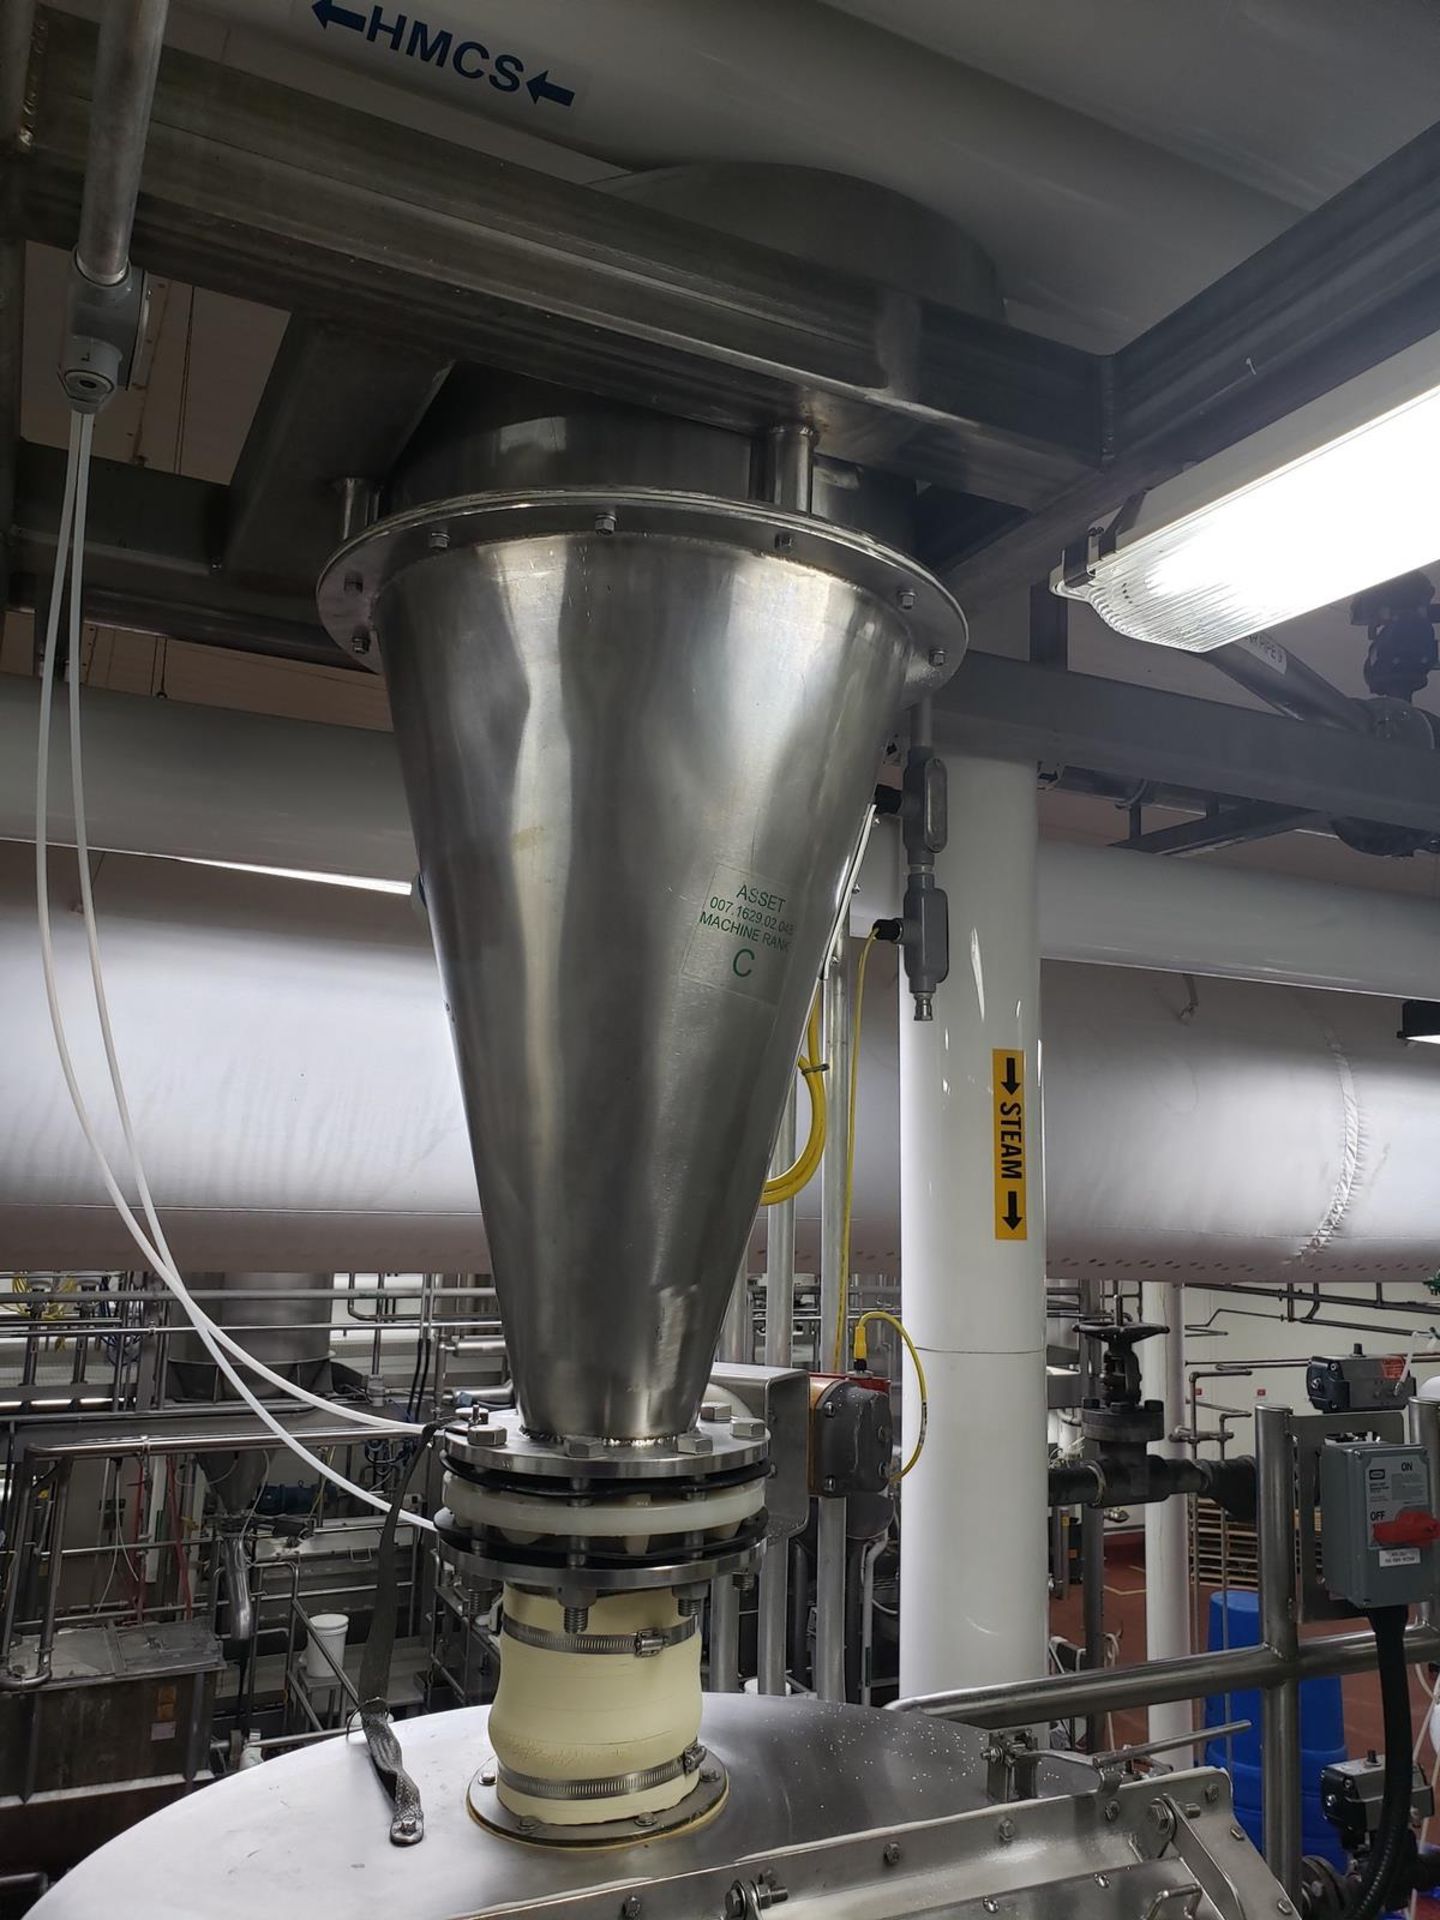 Stainless Steel Sugar Receiver/Loader, W/ Feed Cone | Rig Fee $600 - Image 2 of 2